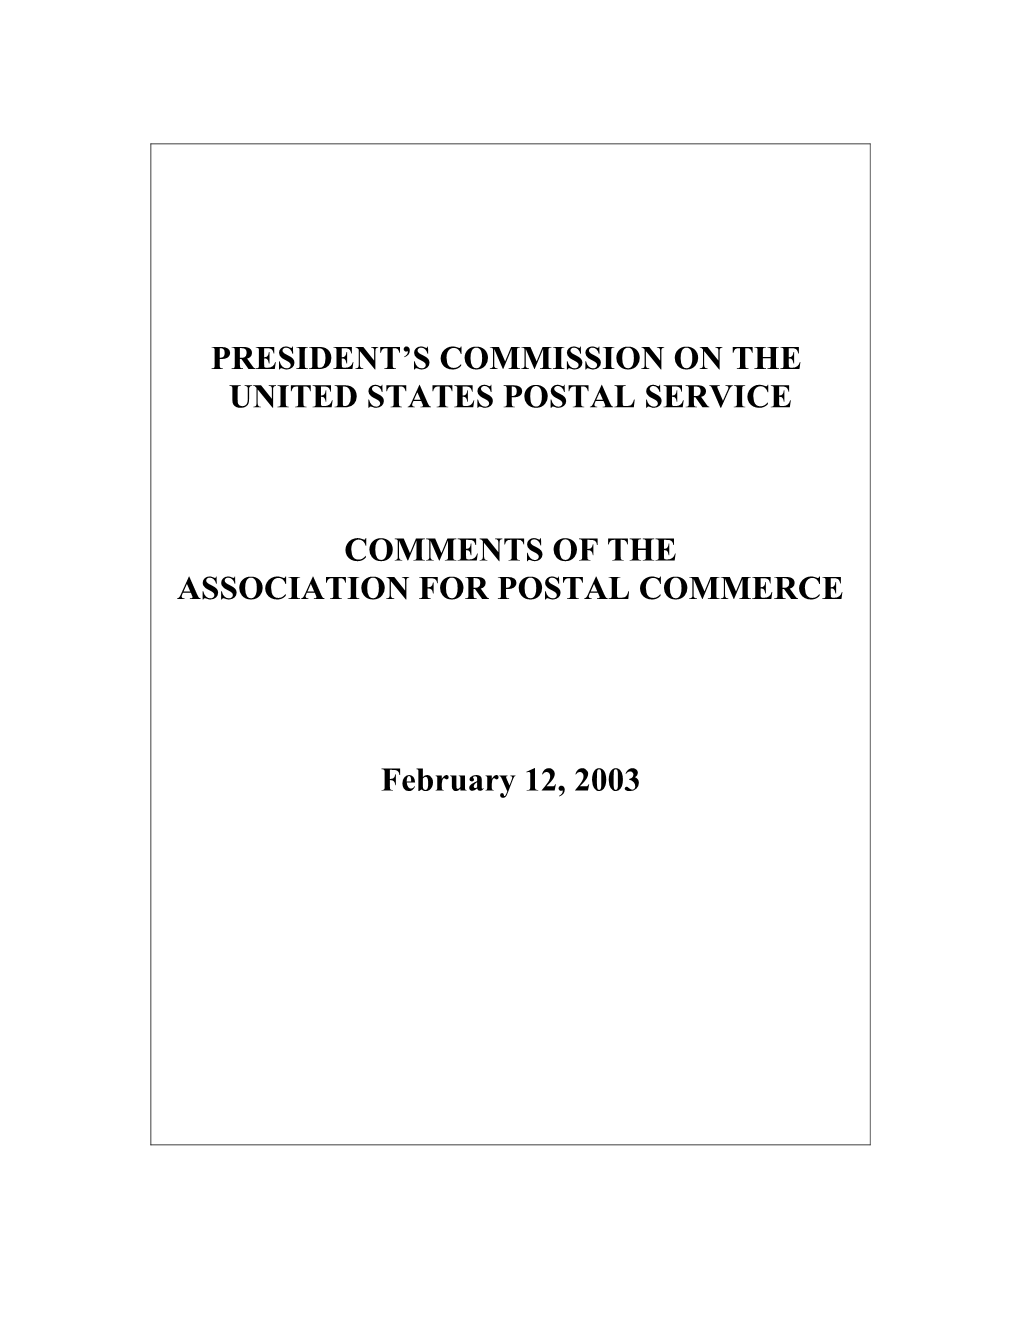 Comments of the Association for Postal Commerce